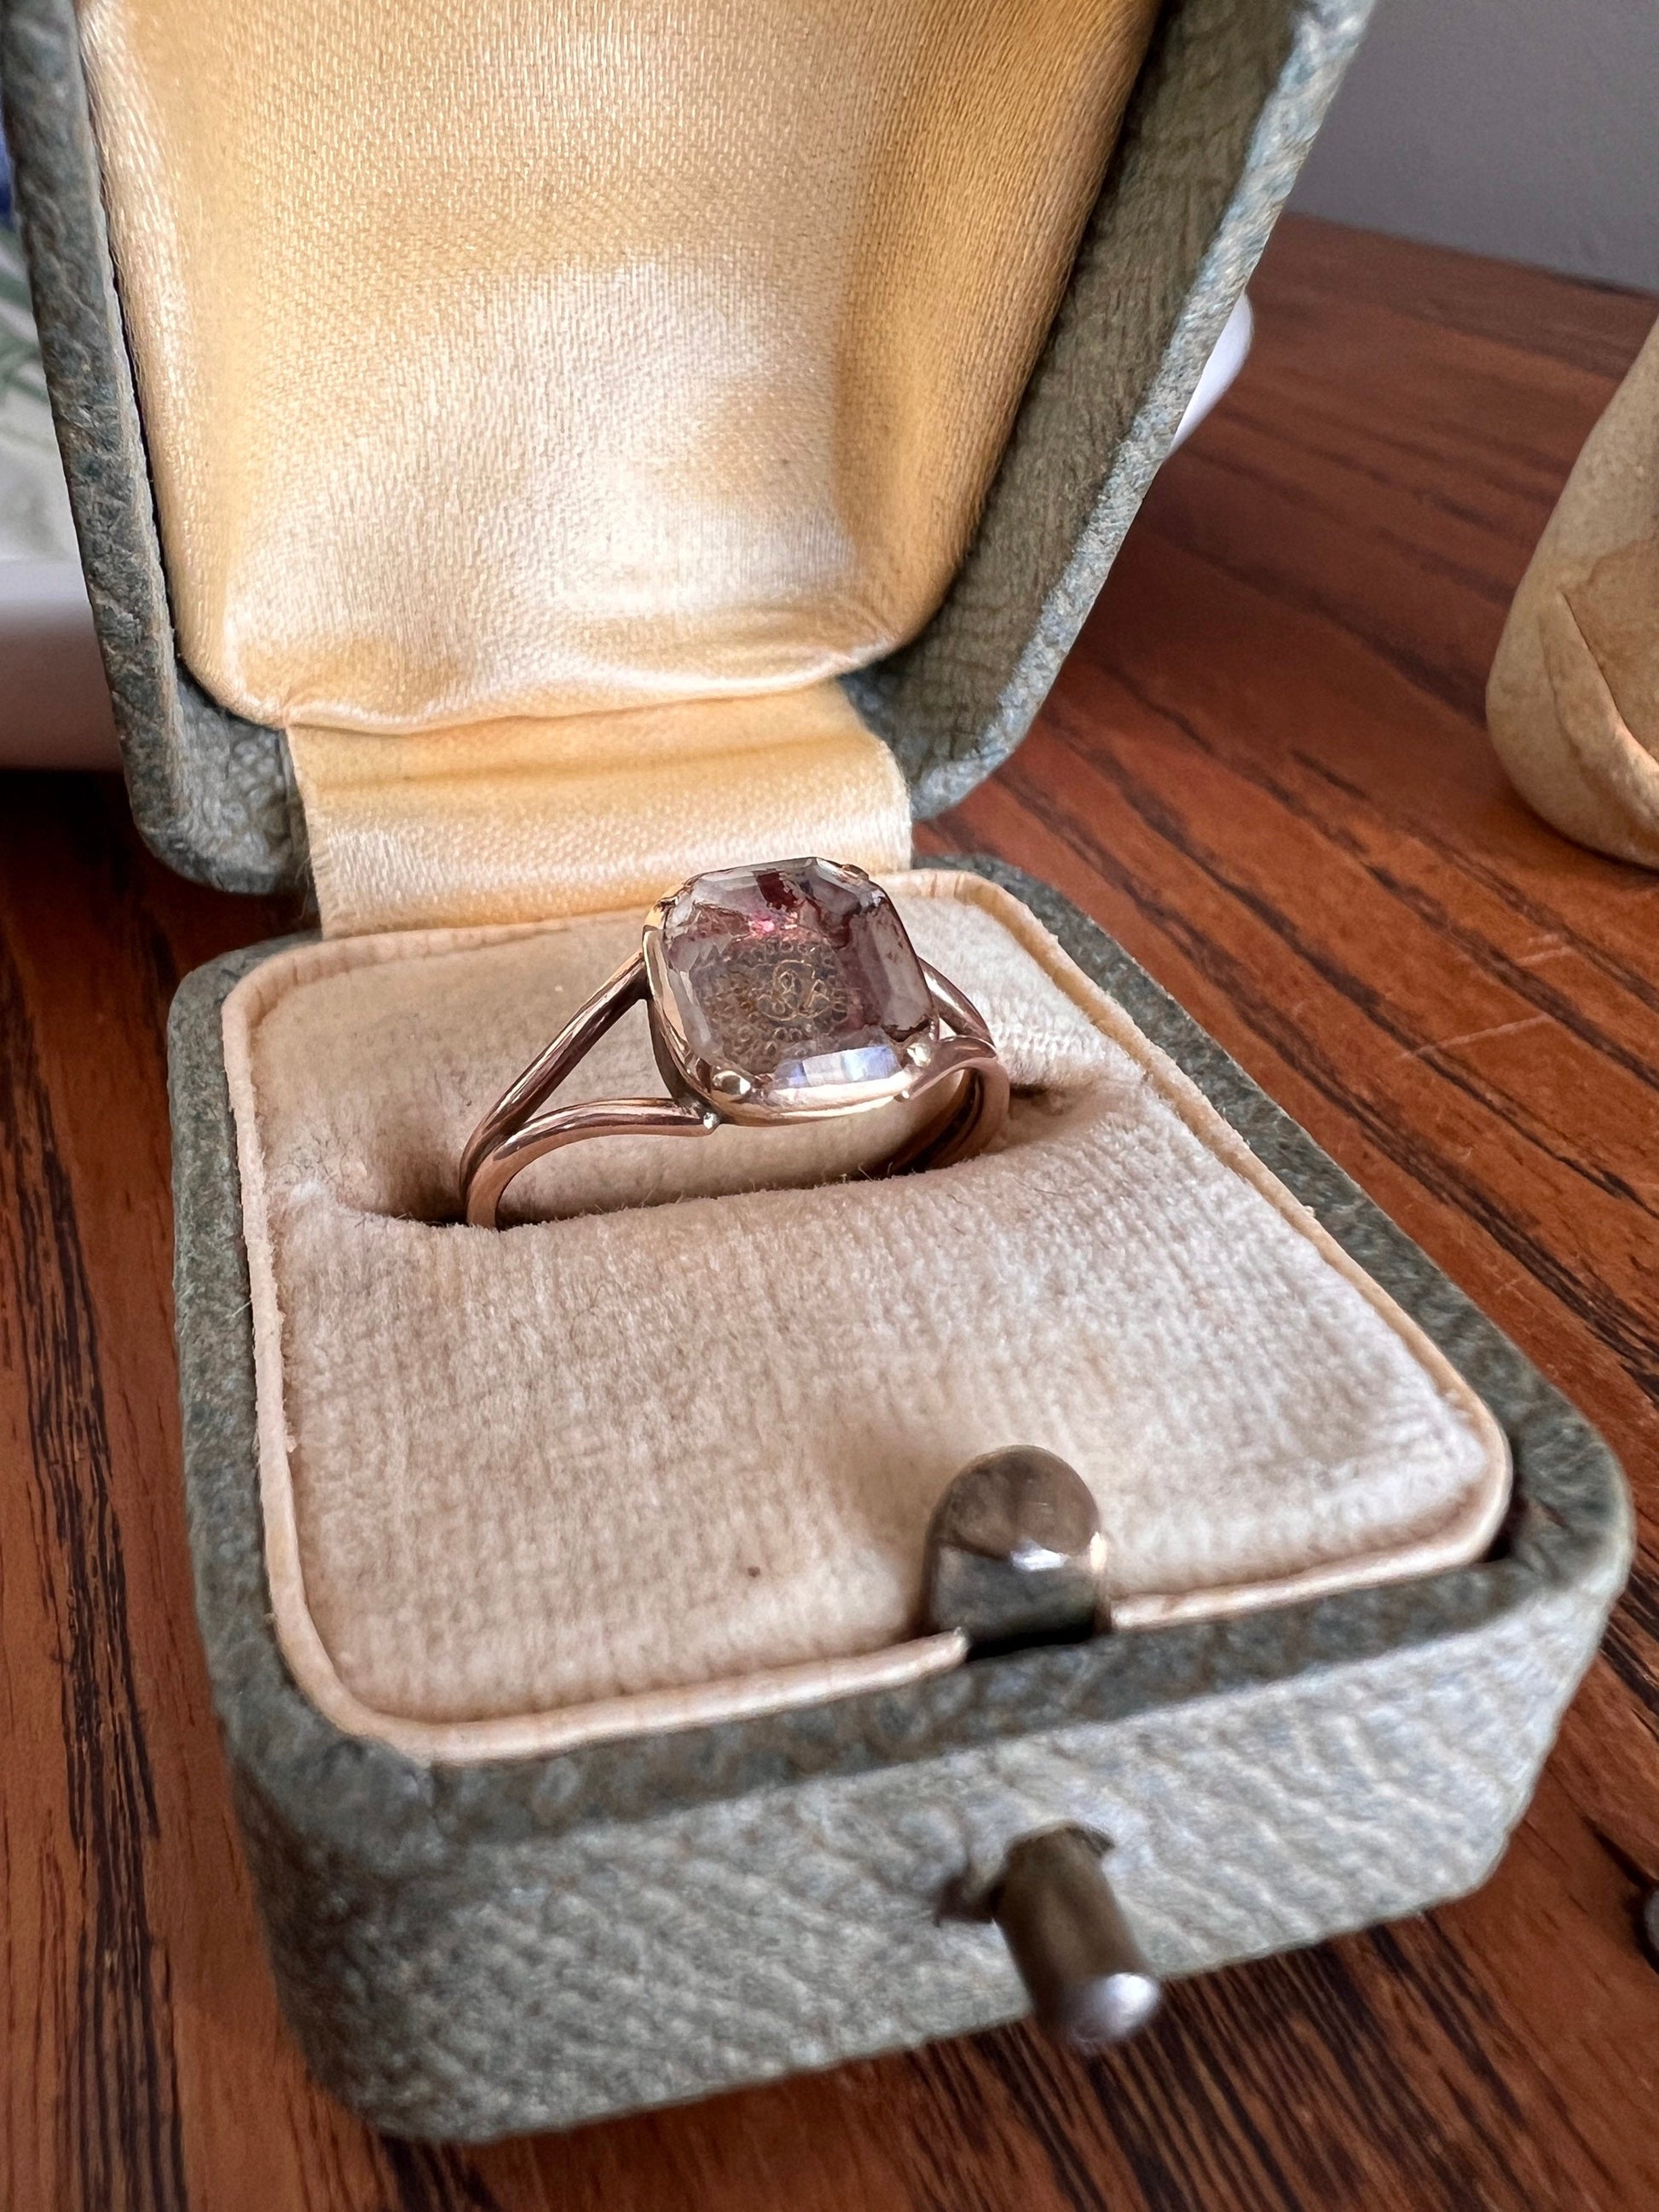 Antique STUART Rock CRYSTAL Ring Gold Wire Cypher GEORGIAN Era or Older 1650 1700s English Foiled Quartz Hair Closed Back Collectible Gift